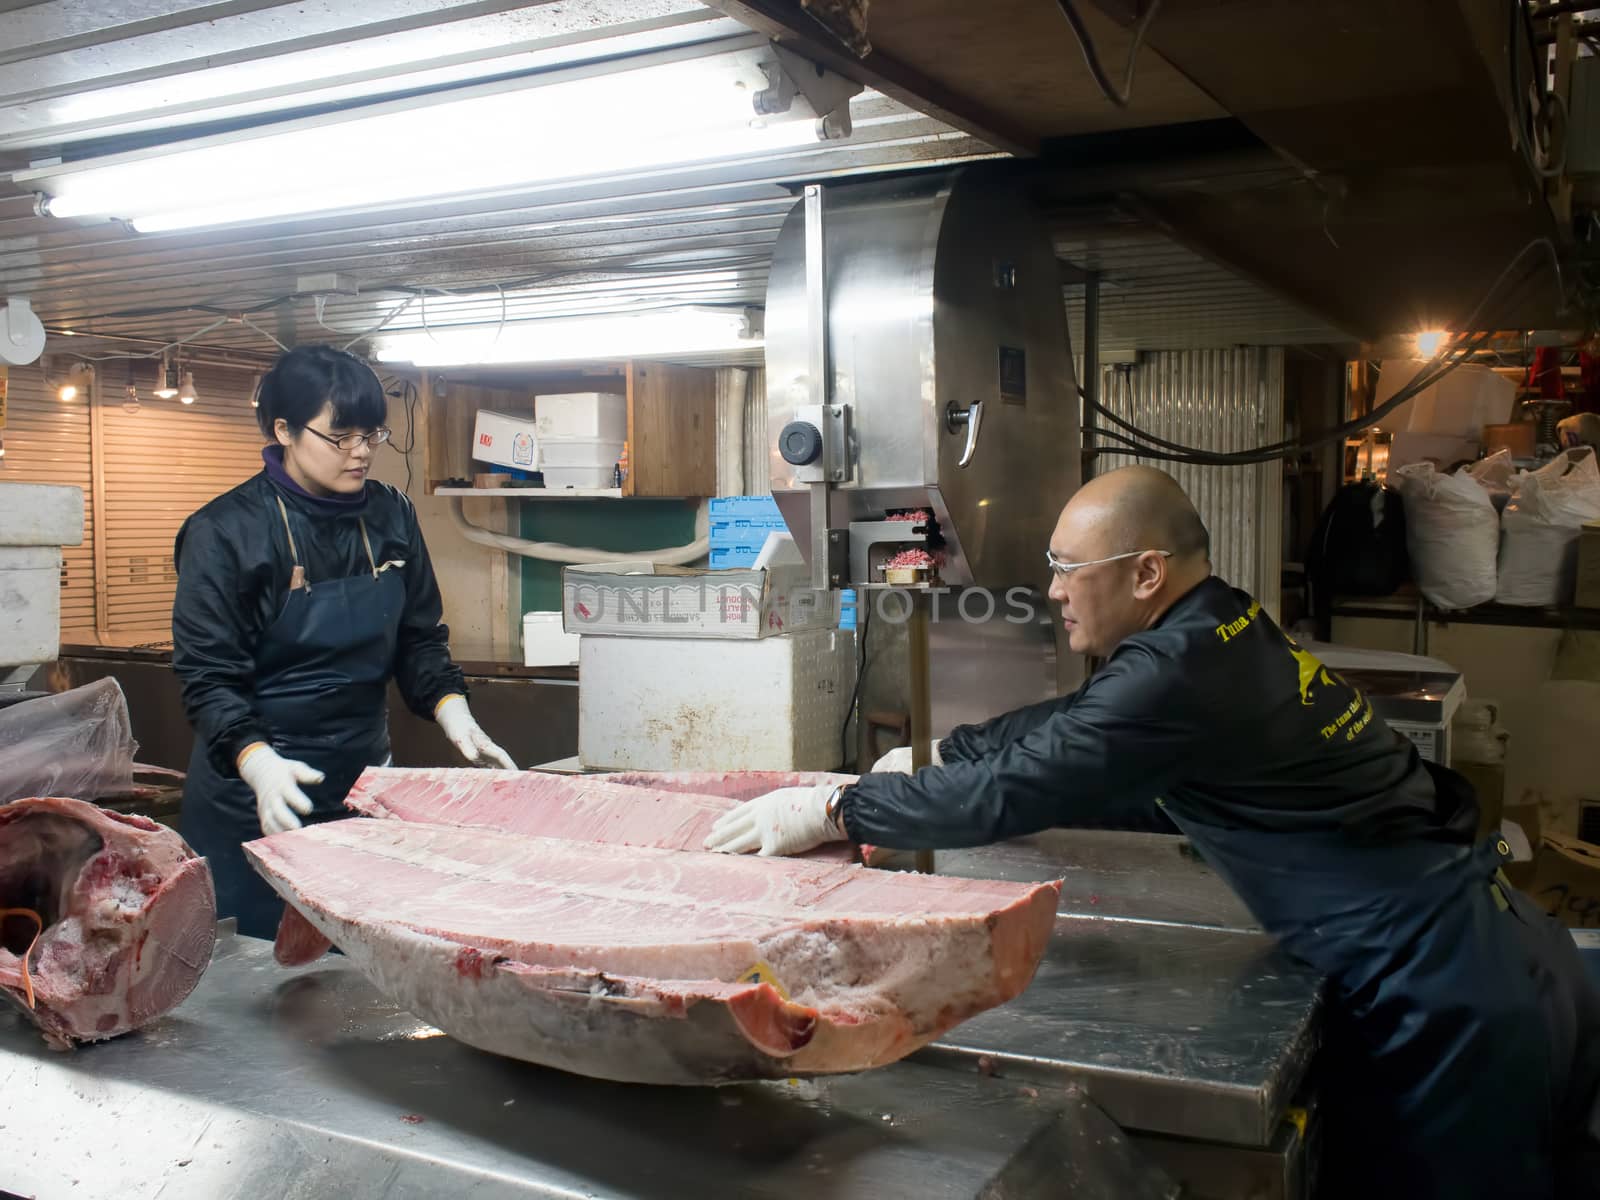 Tokyo, Japan - November 12, 2015: Workers cutting up a giant tuna with electric saw at Tsukiji fish market. Tsukiji is the biggest fish market in the world. The Tuna auction is the main attraction for tourists.